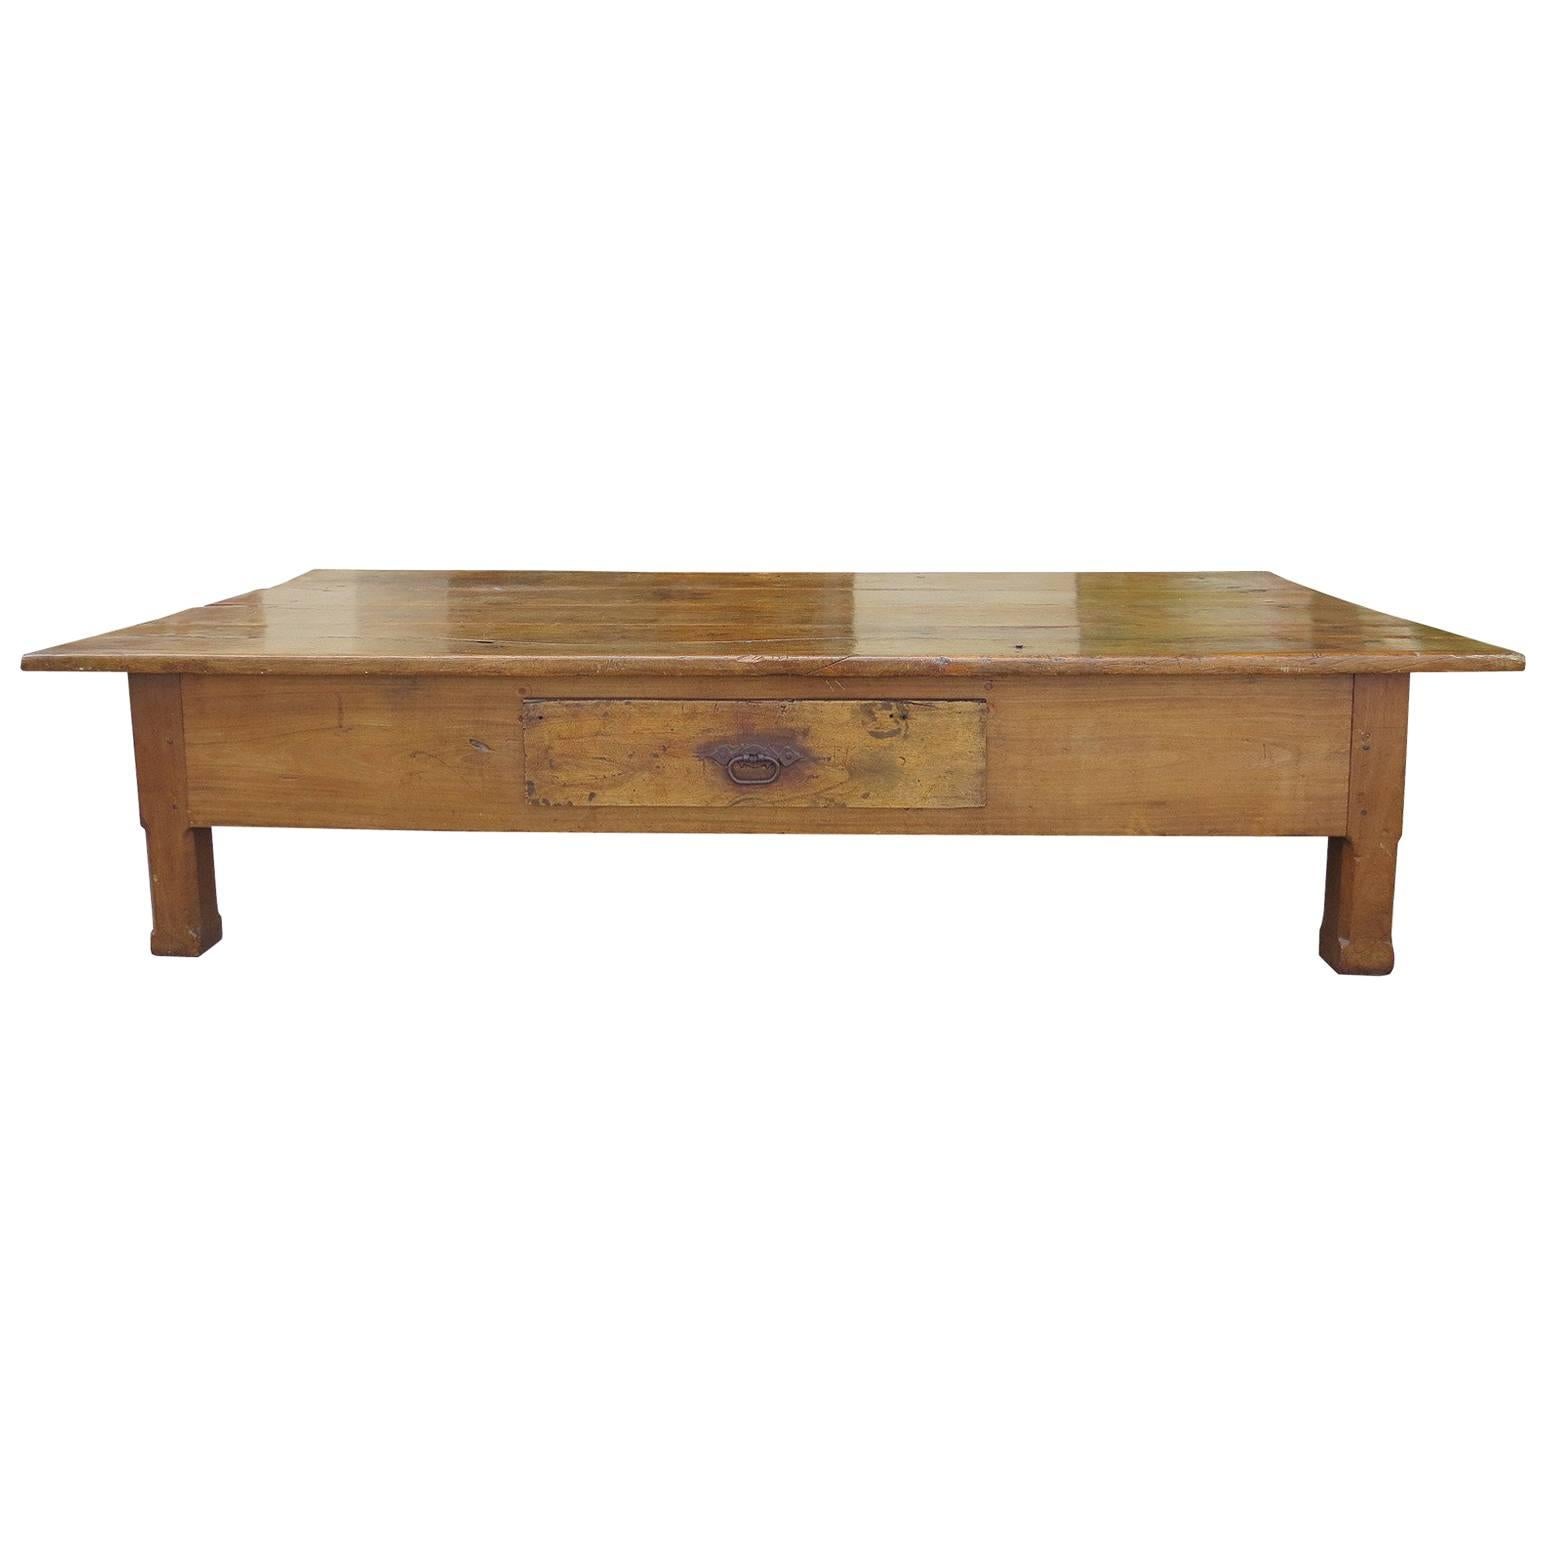 19th Century French Jumbo, Fruitwood Coffee Table with Drawer